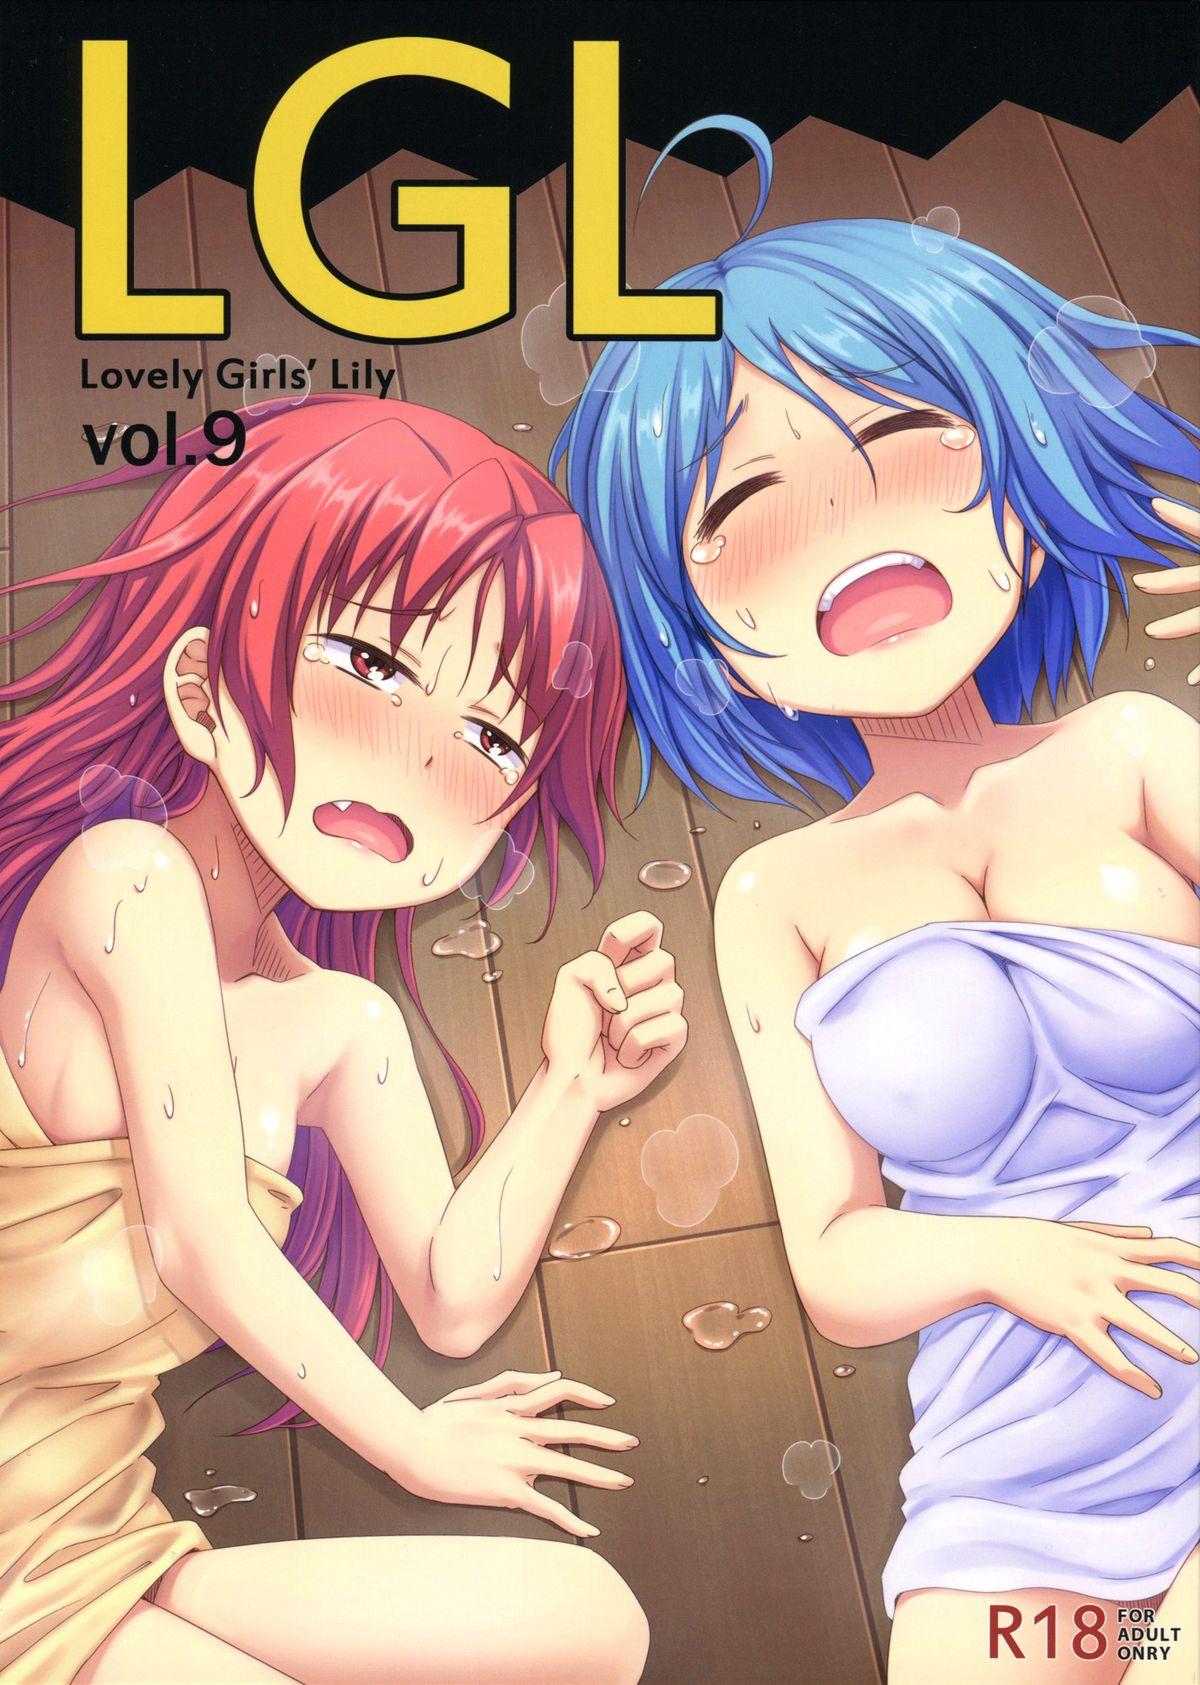 Office Sex Lovely Girls' Lily Vol. 9 - Puella magi madoka magica Oral Sex - Page 1